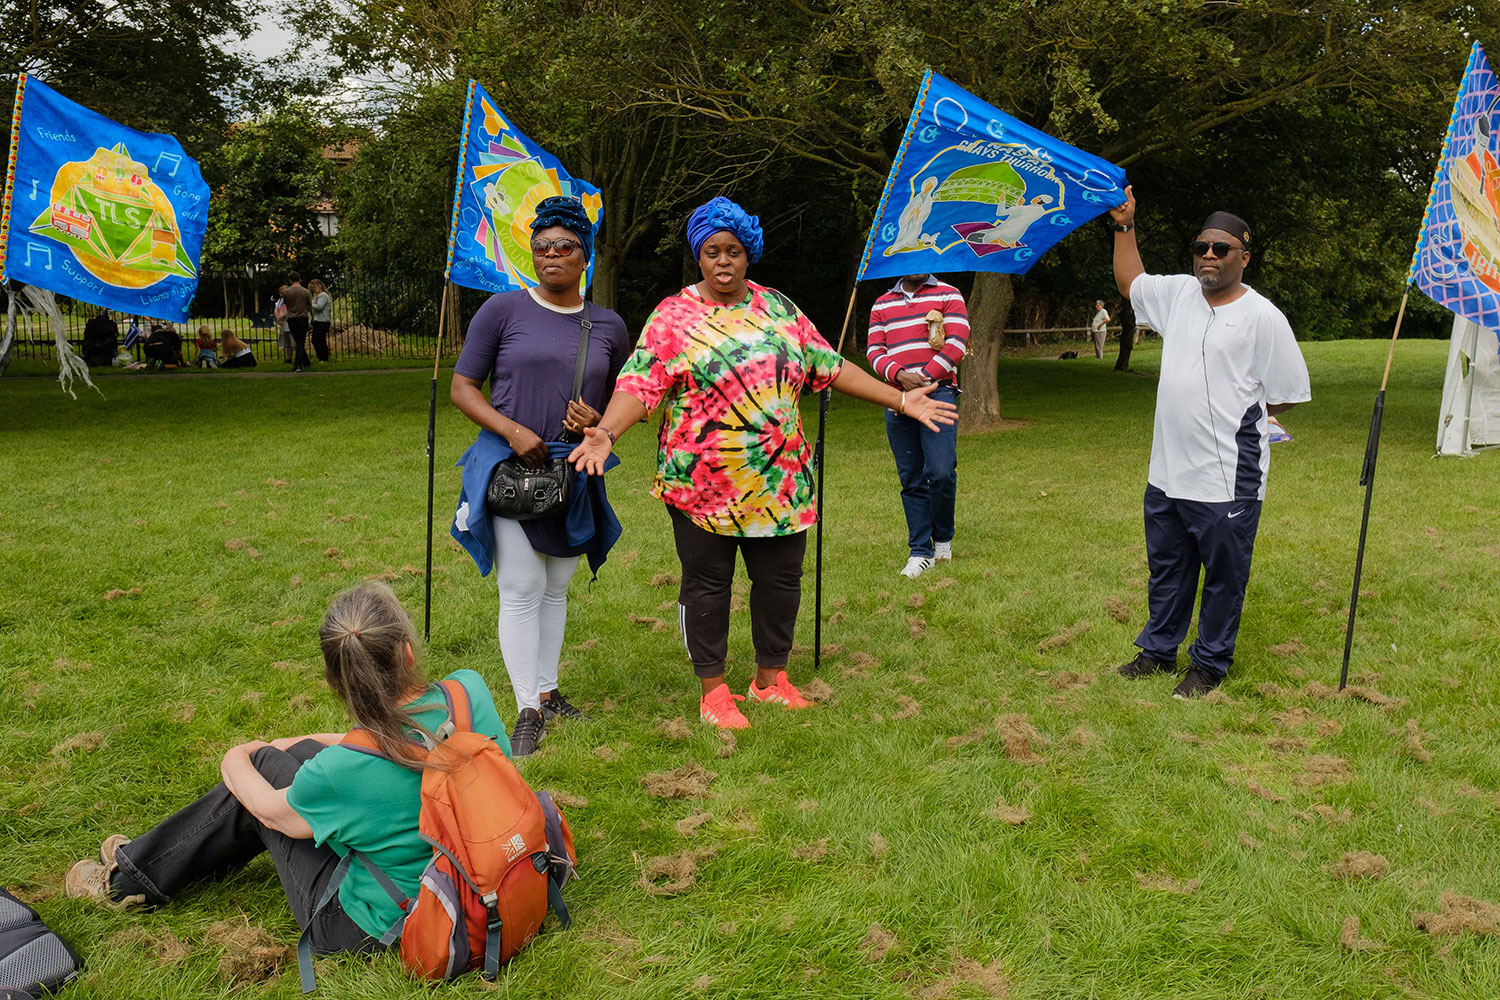 Bola and Remi speak about their group represented on one of the new Grays flags